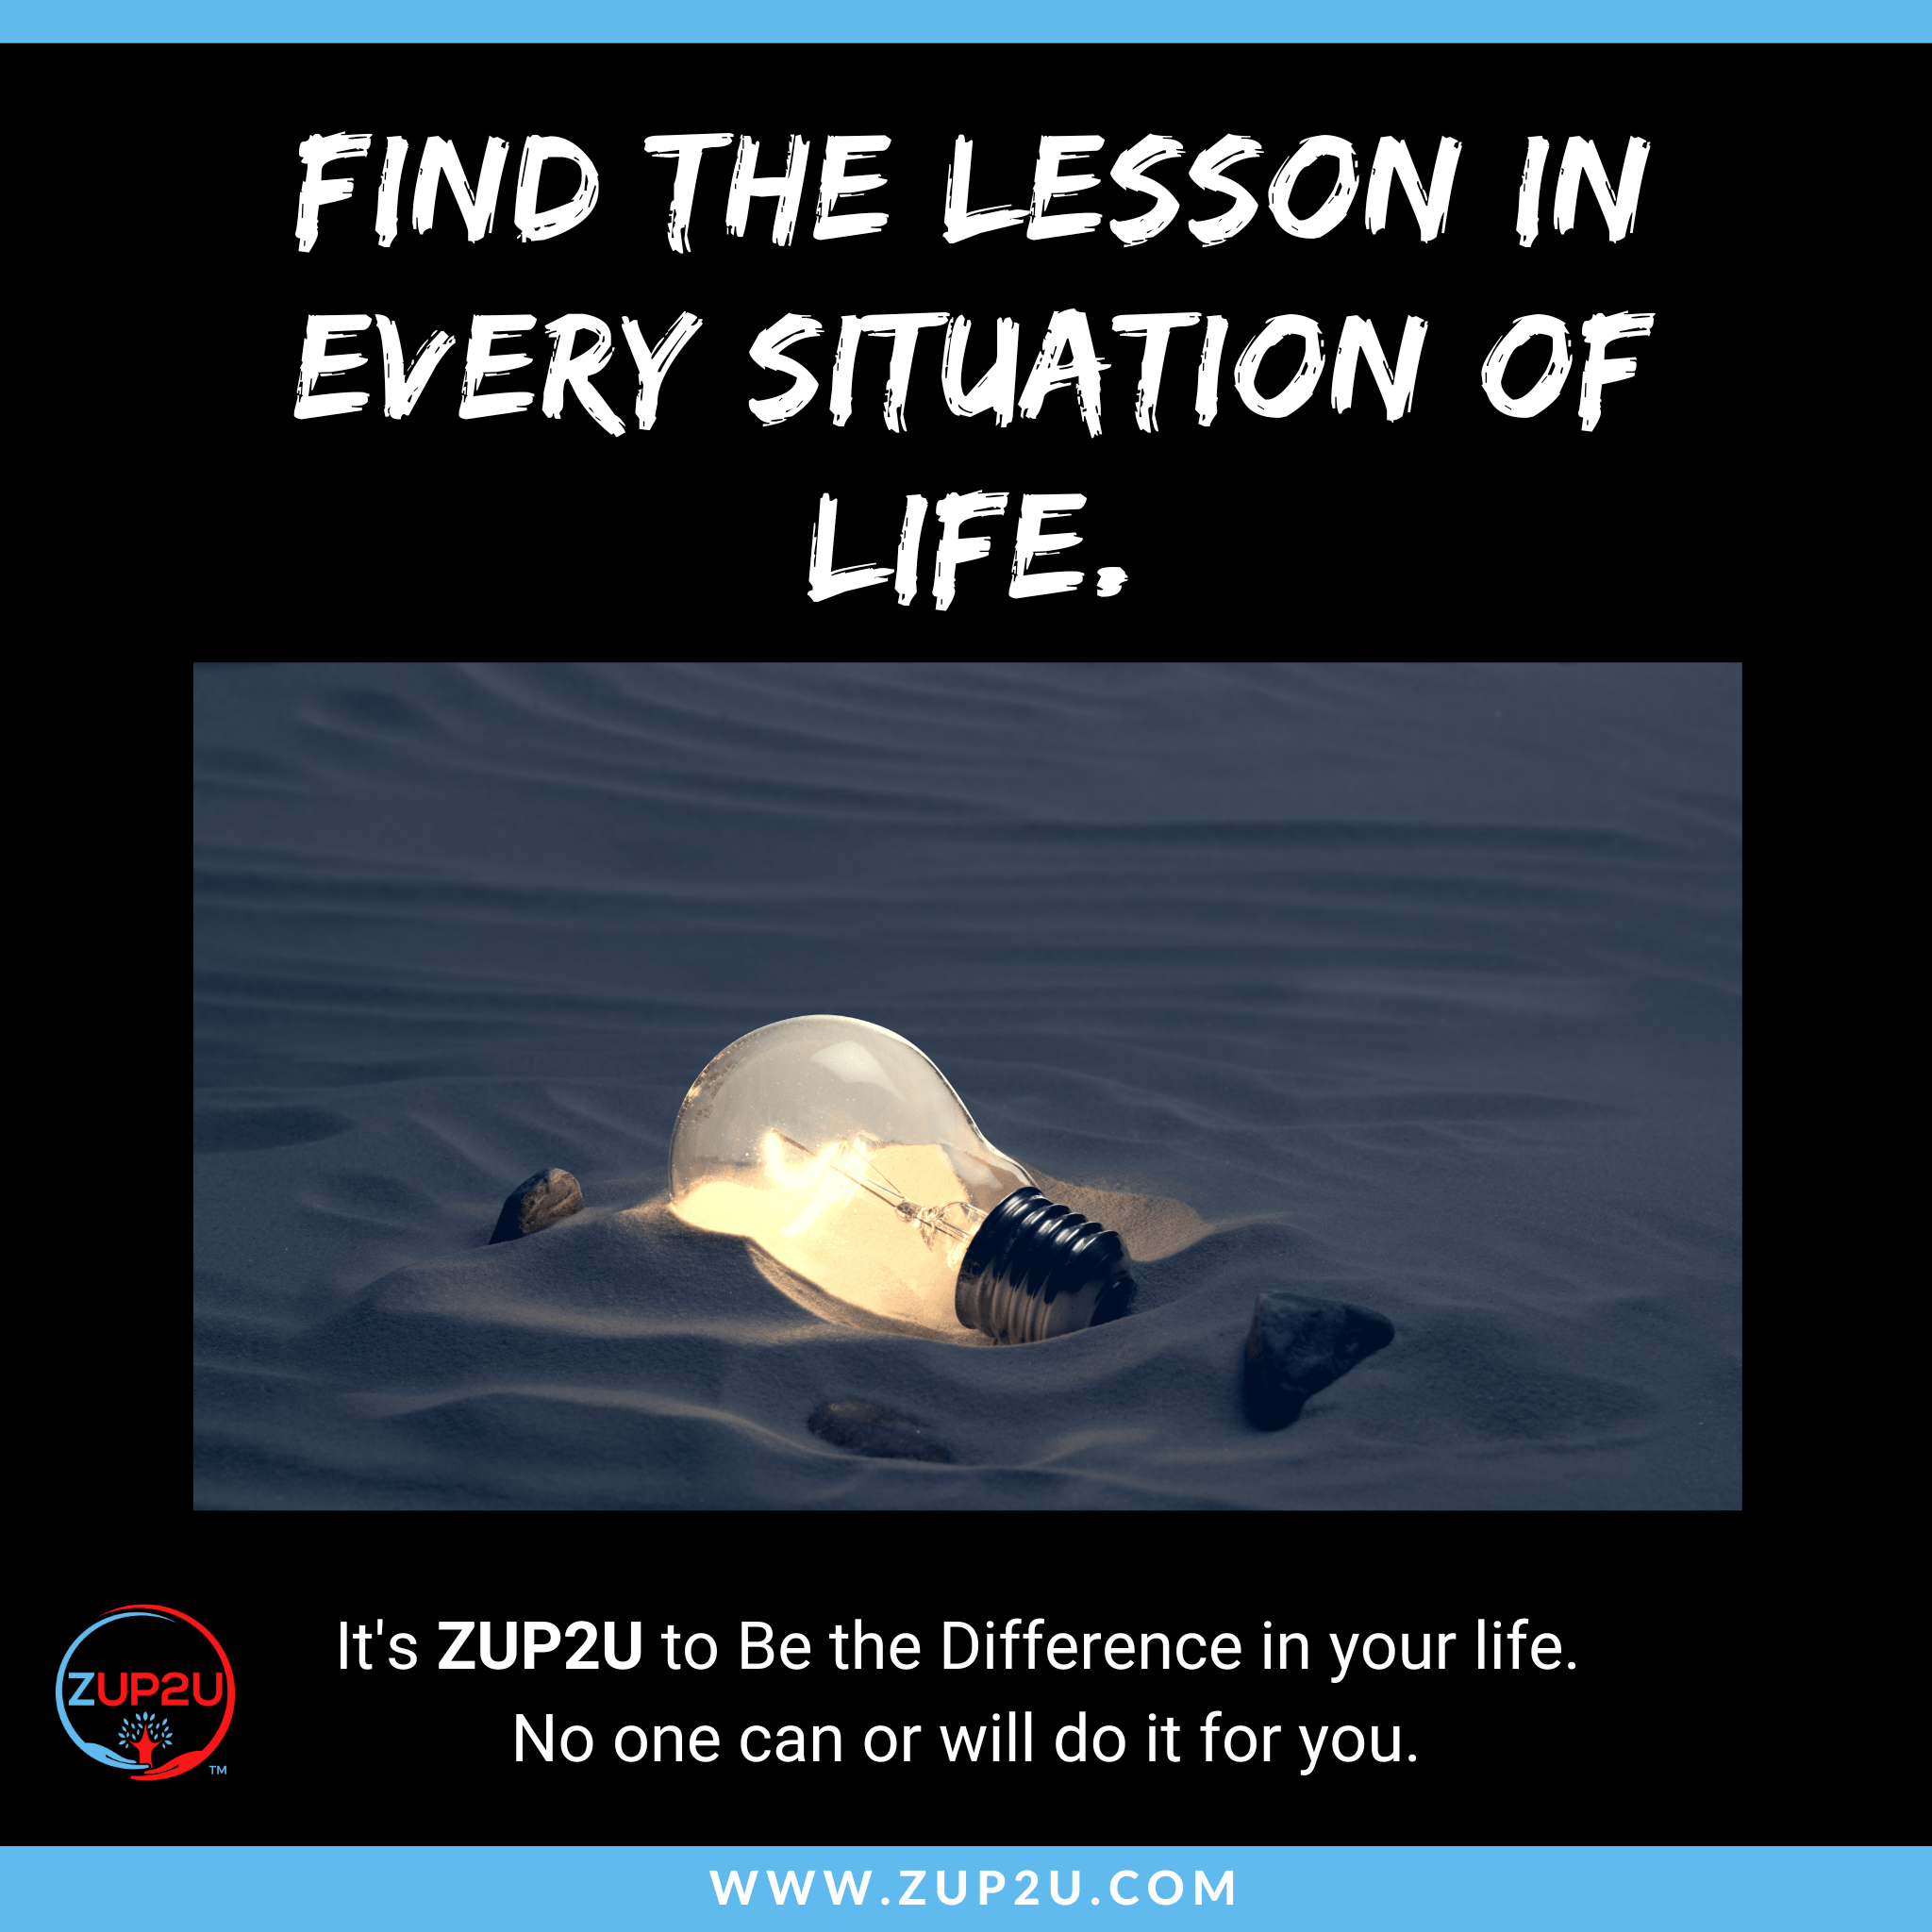 Find the Lesson In Every Situation of Life